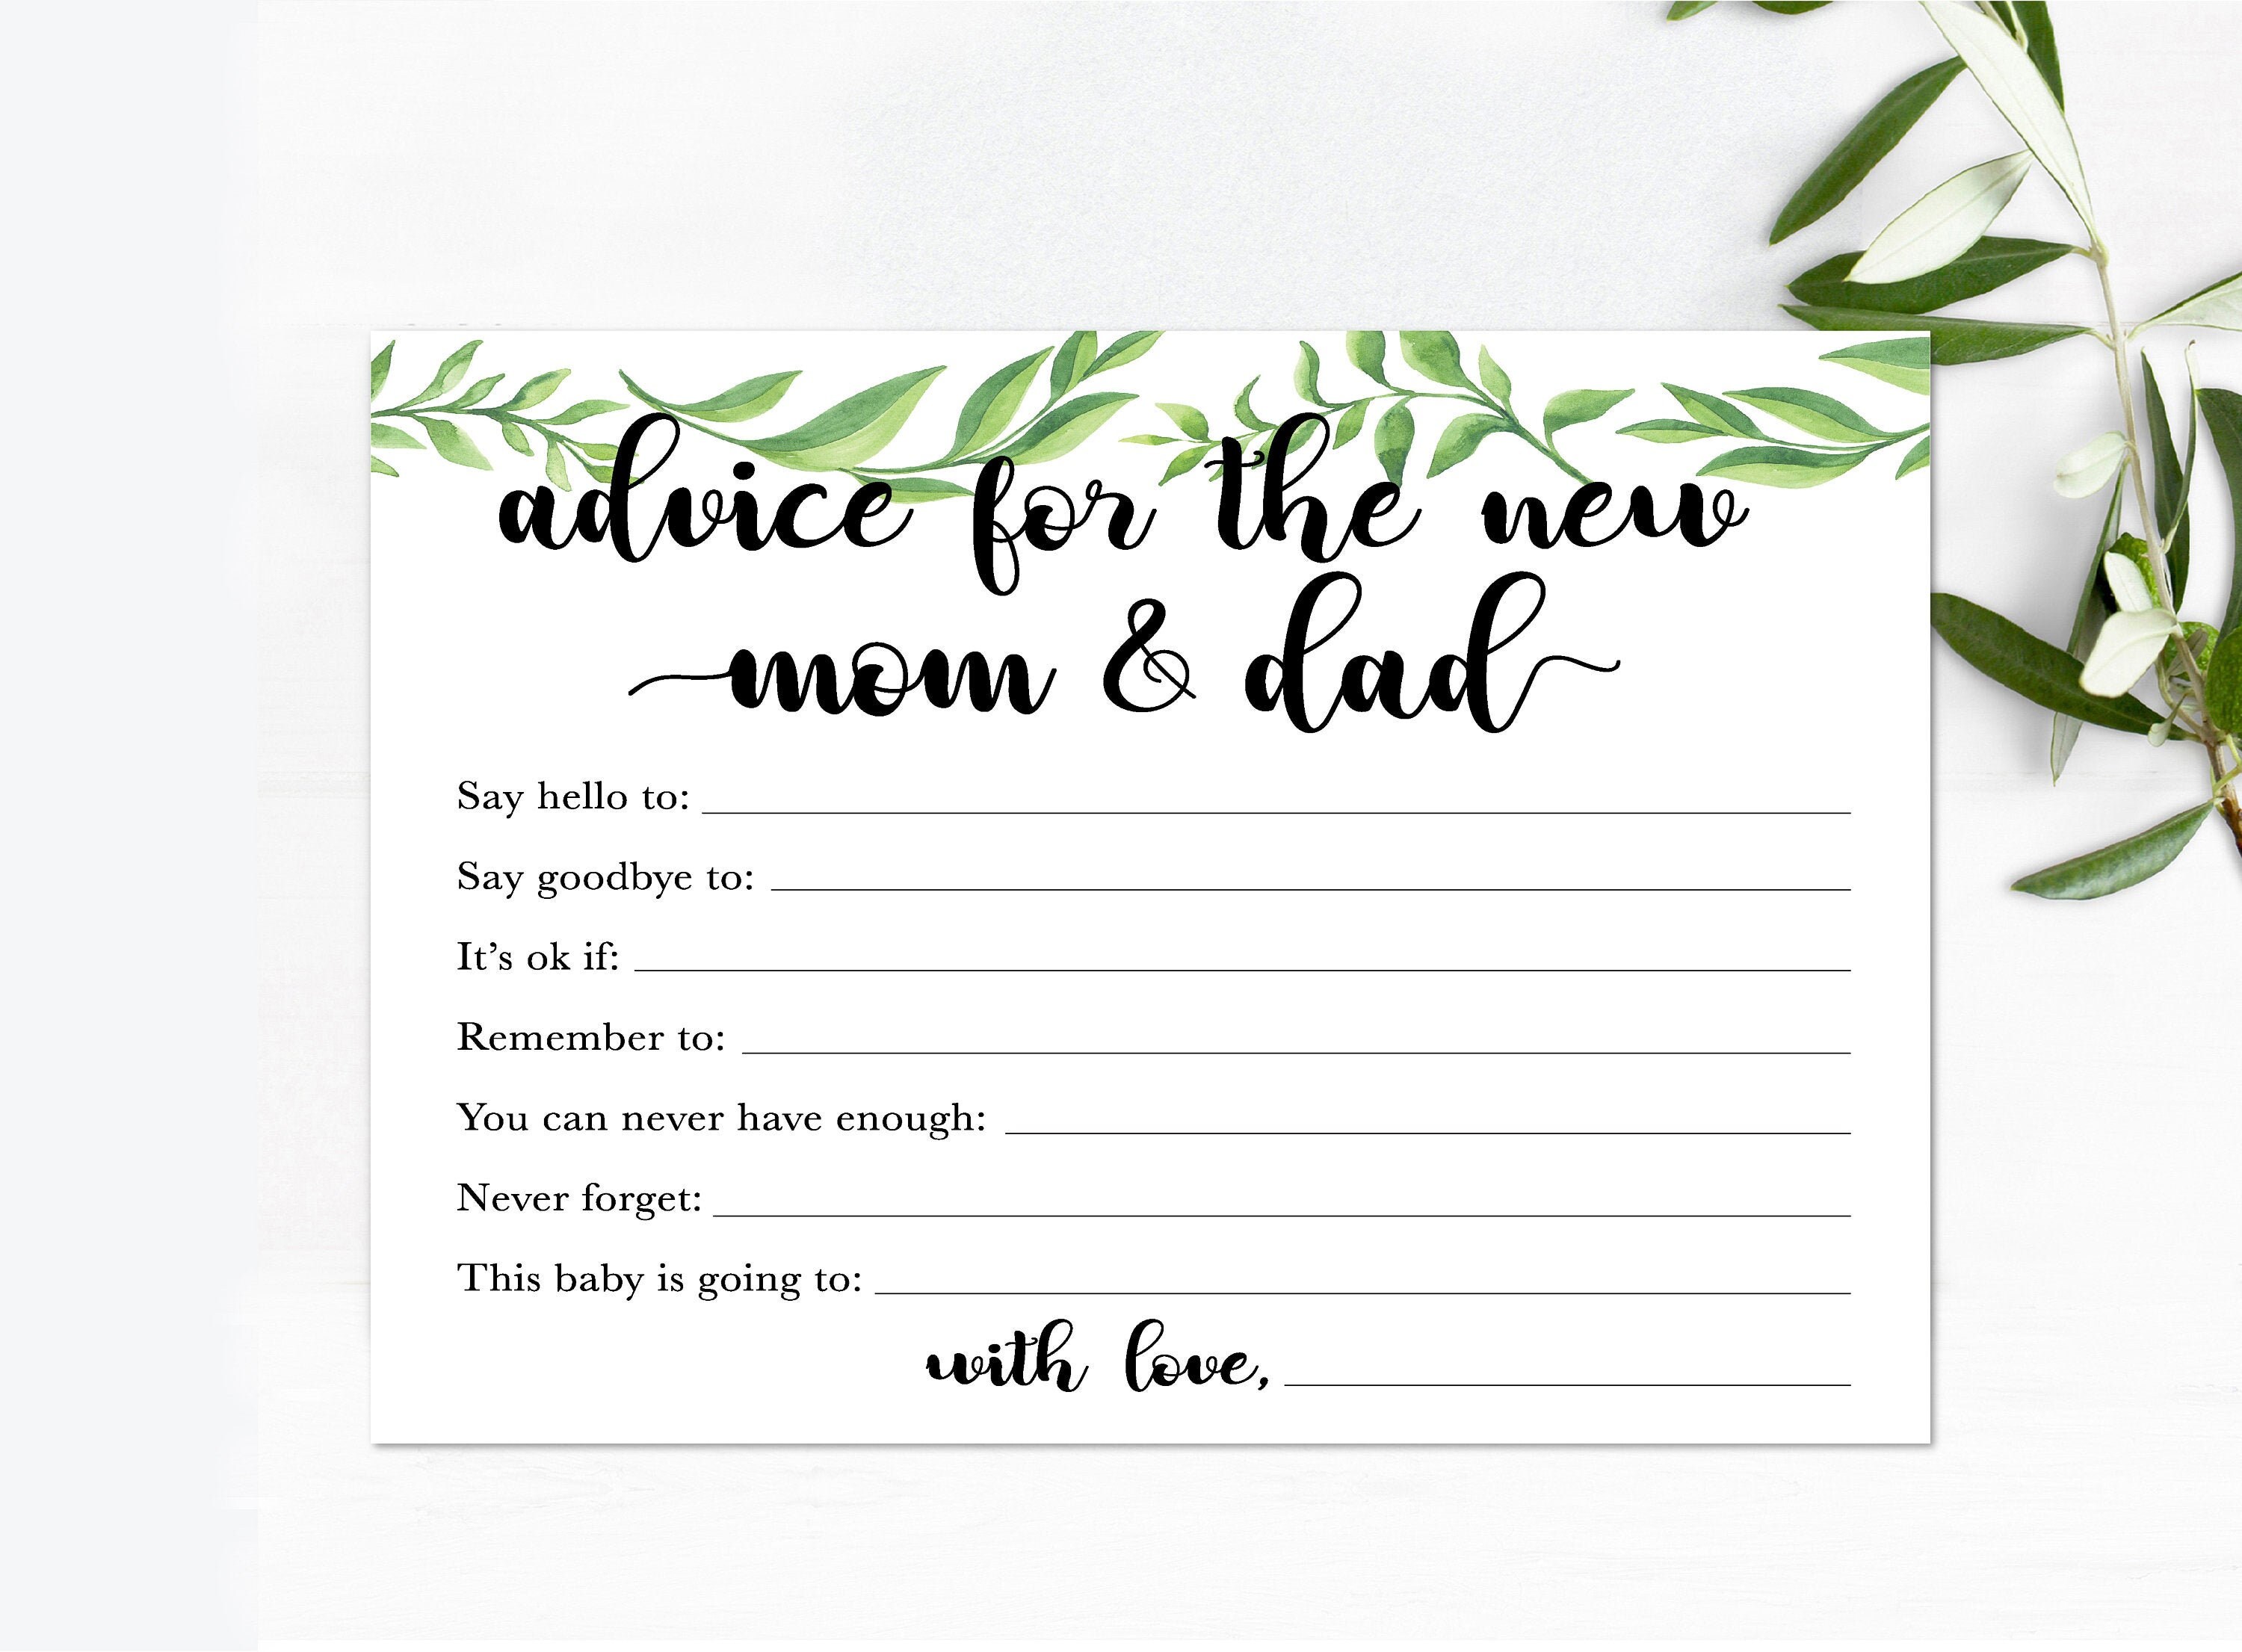 New Parents Well Wishes And Advice Card Printable Ubicaciondepersonas 